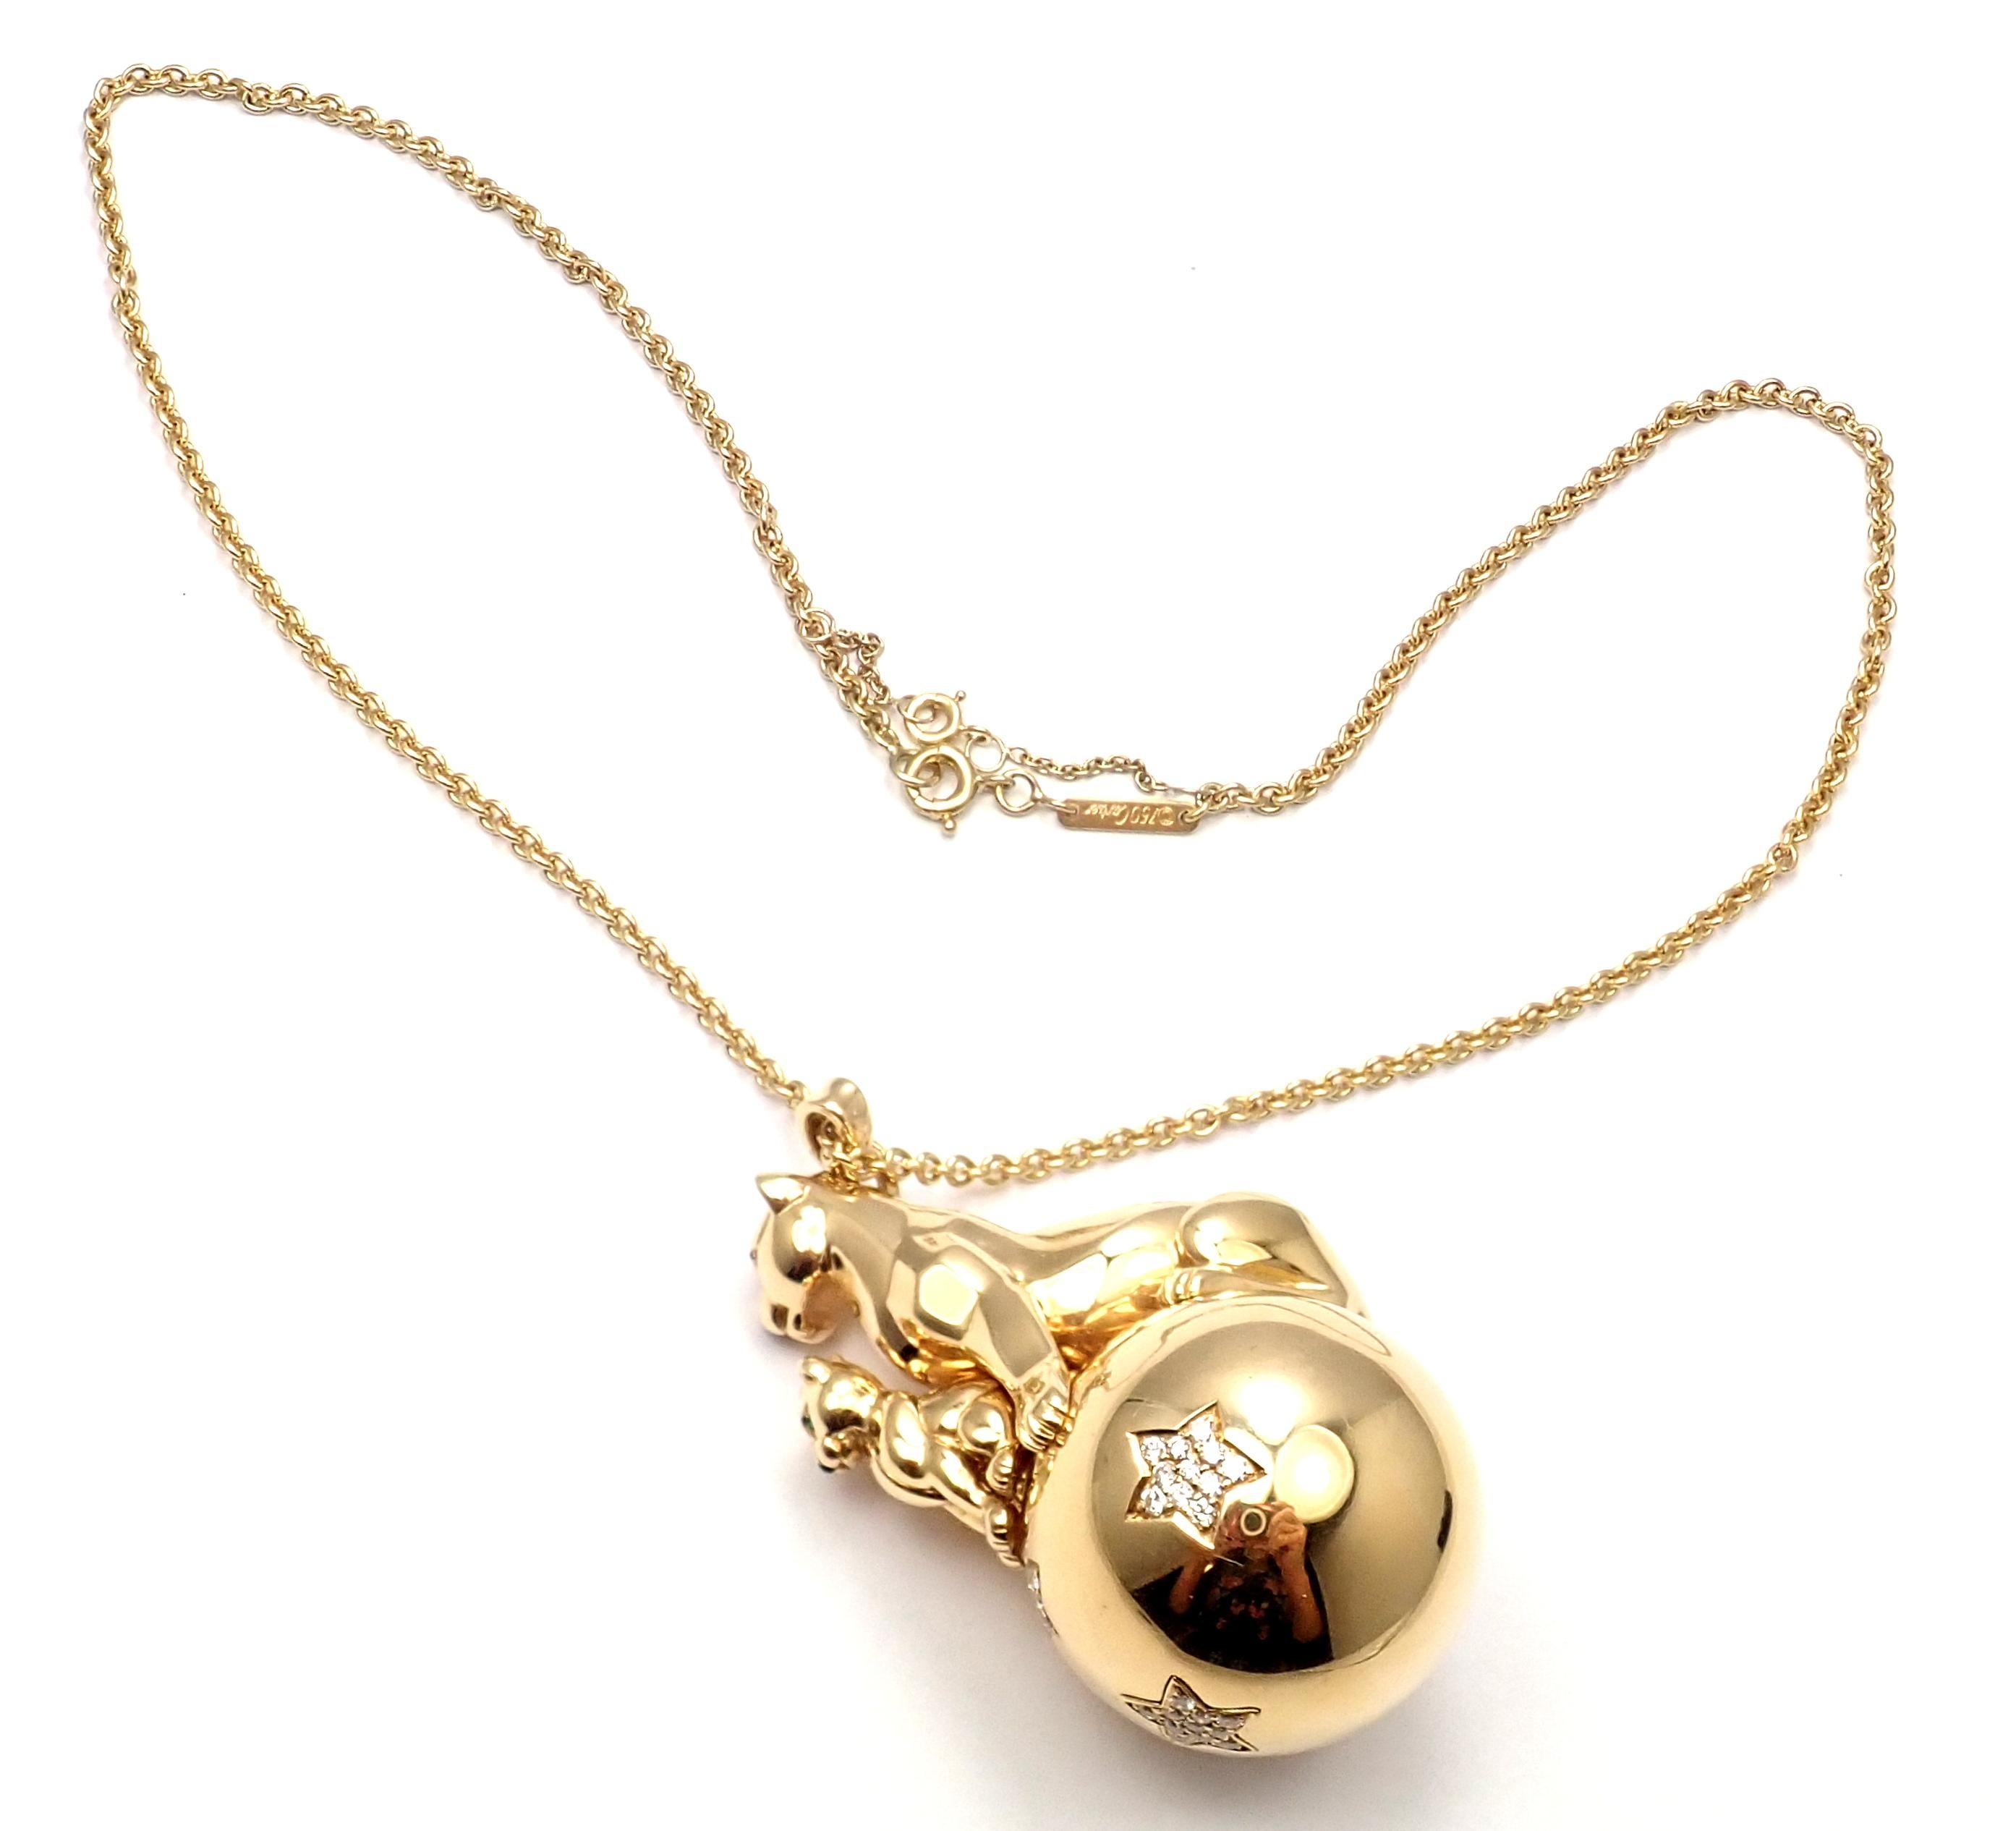 Brilliant Cut Cartier Panthere Diamond 2 Panthers Balloon Yellow Gold Pendant Necklace